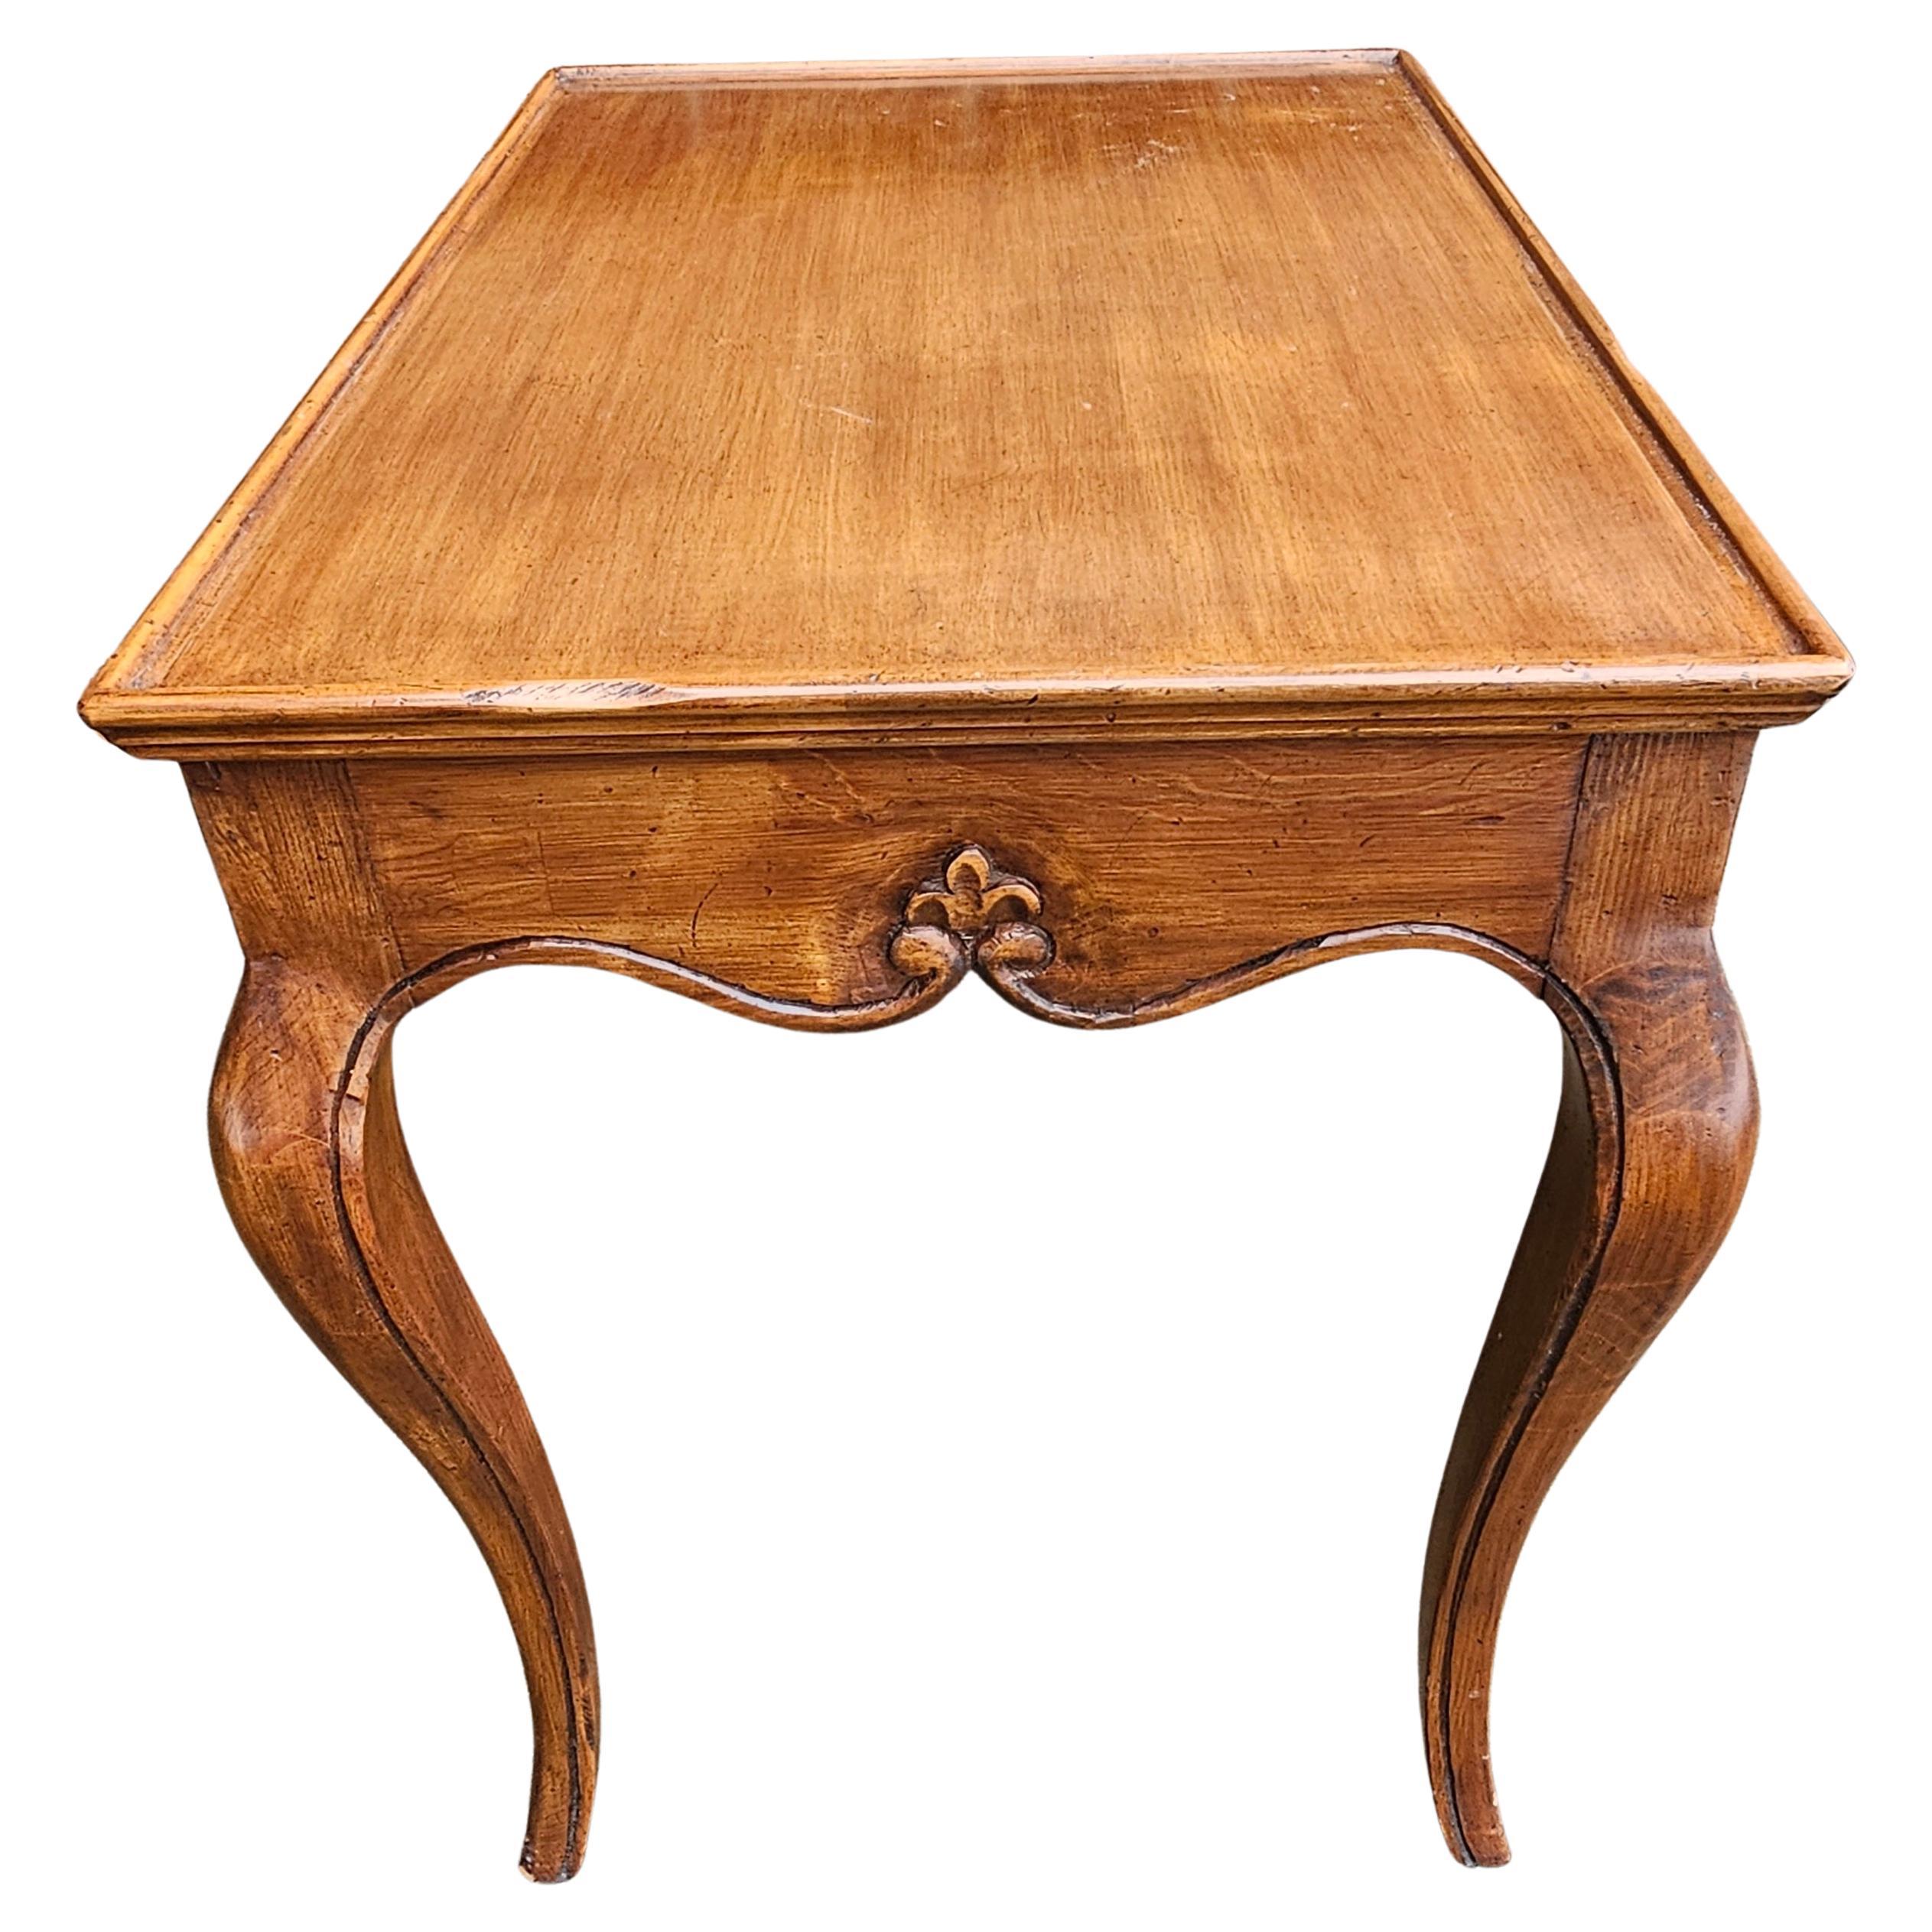 A beautifully handcrafted and hand carved solit fruitwood side table by Wellesley Guild.
Handcrafted by finest artisans in Mexico. All solid wood. Great vintage condition. Measures 30